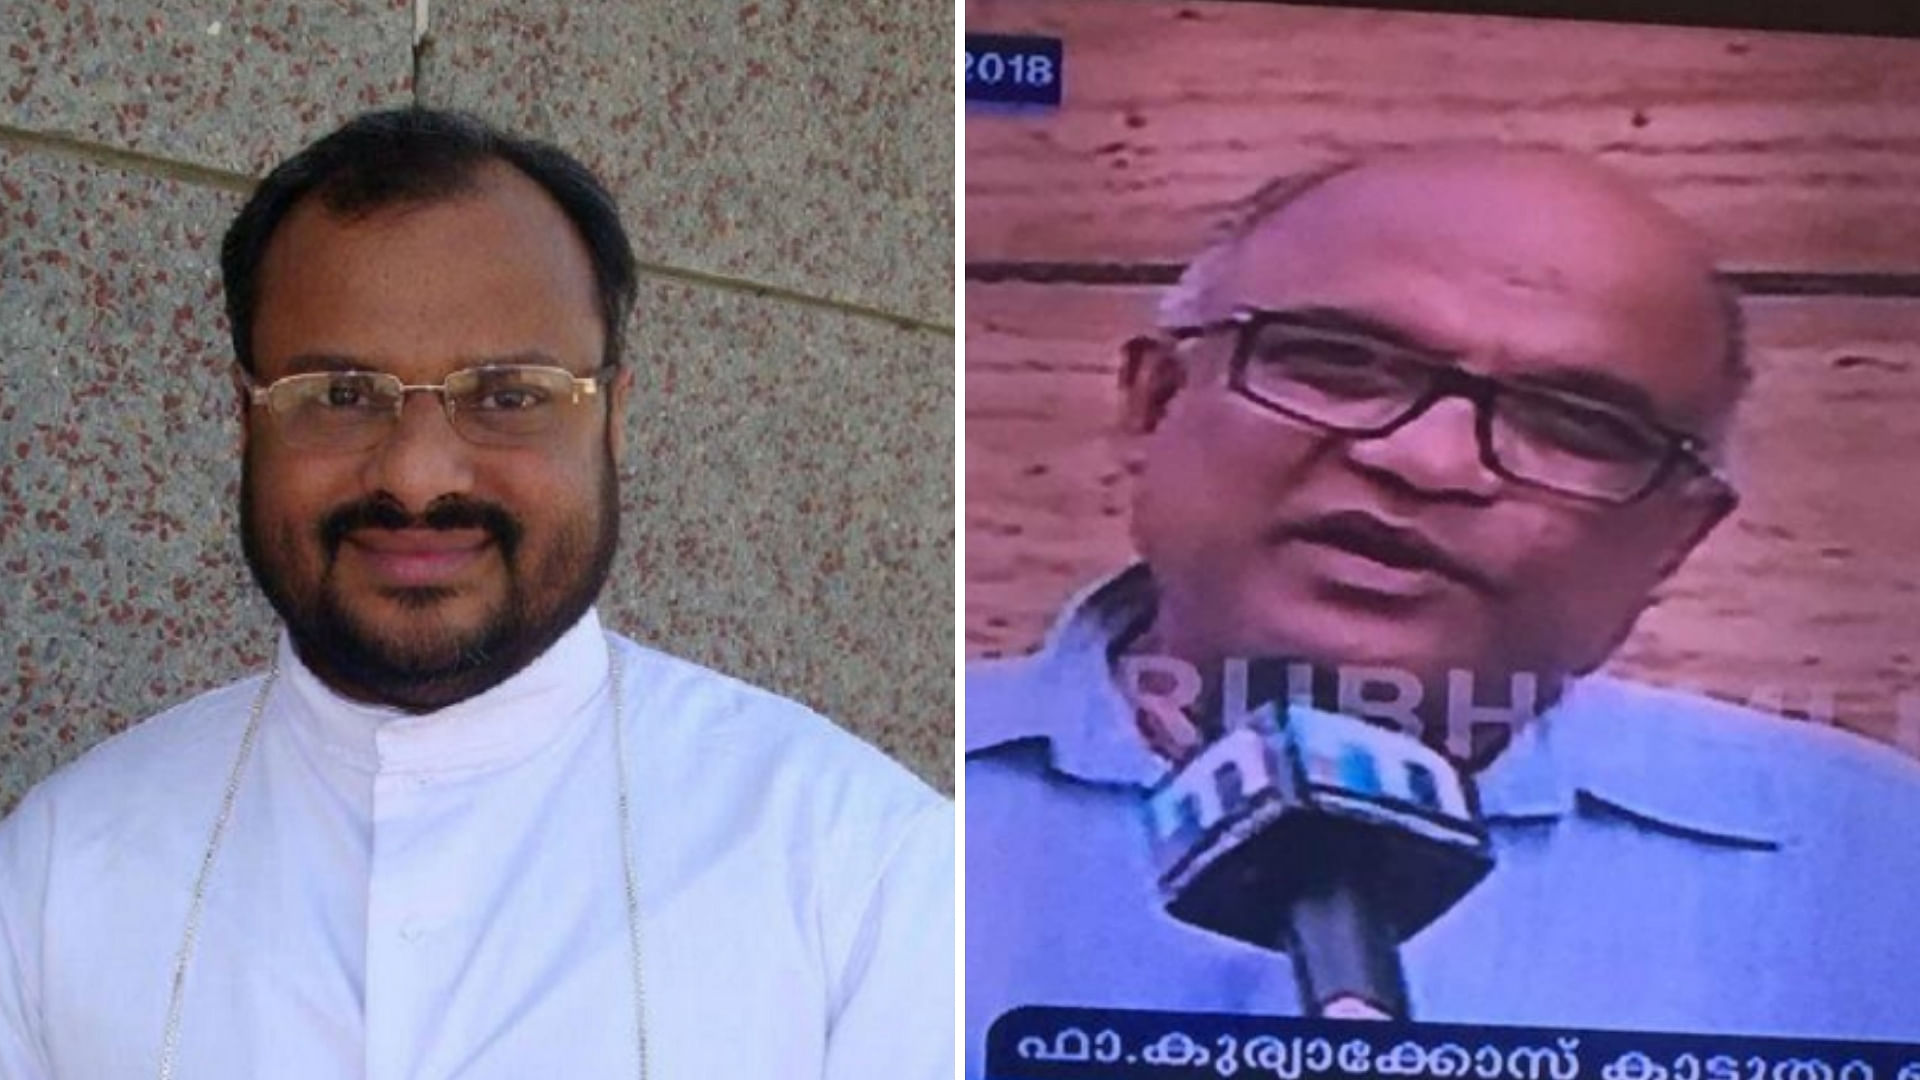 Father Kuriakose Kattuthara (R), one of the prime witnesses who had testified against rape accused Bishop Franco Mulakkal (L), was found dead in Jalandhar on Monday, 22 October